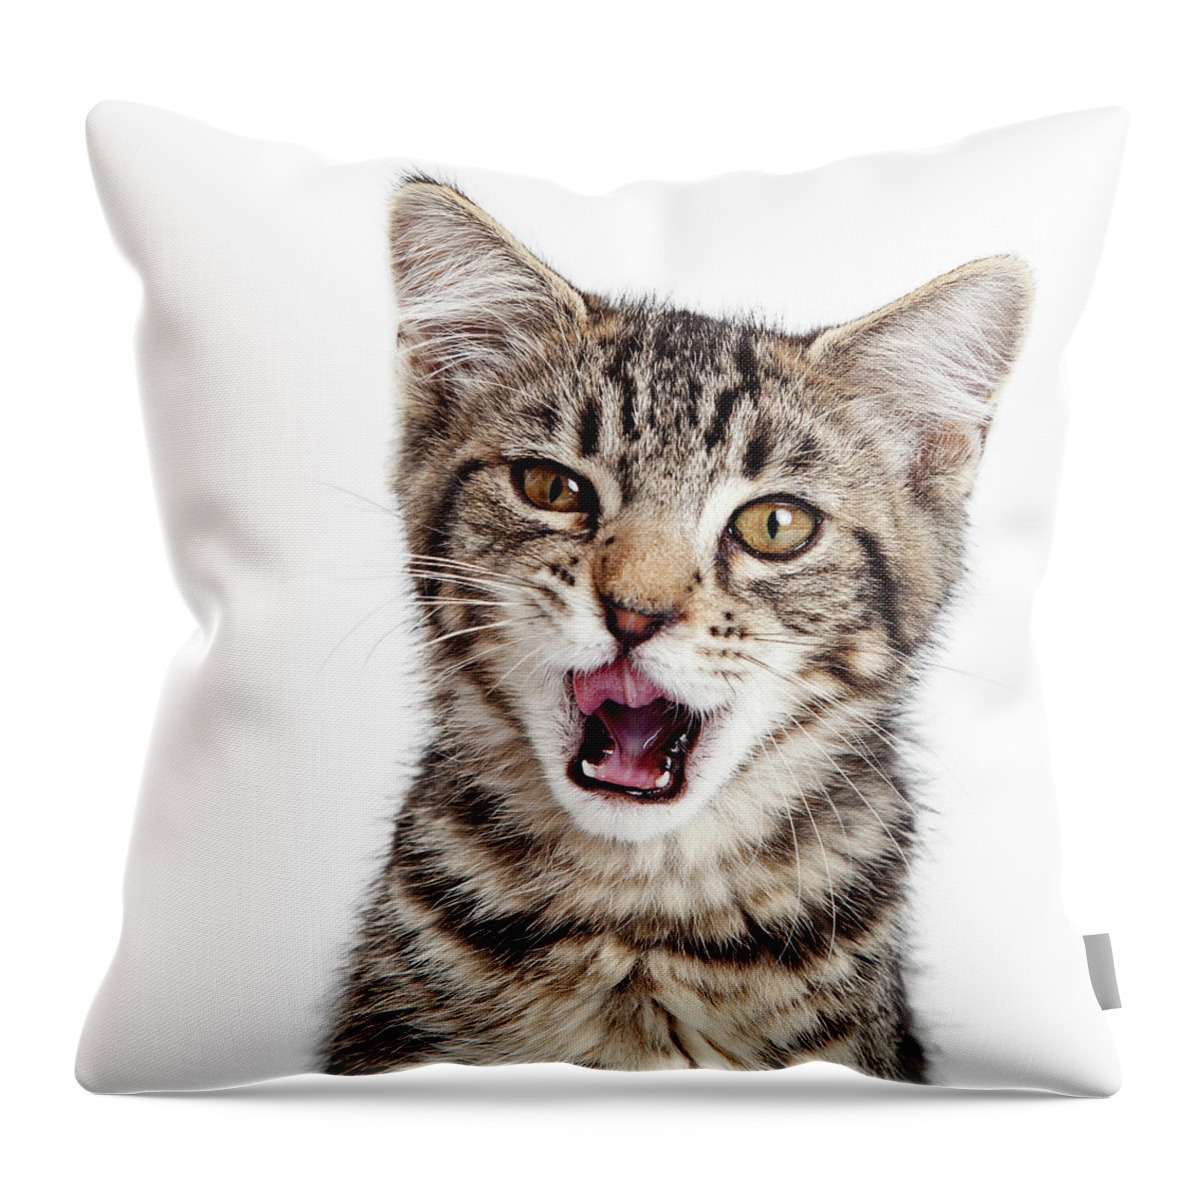 Adorable Throw Pillow featuring the photograph Kitten Hungry Mouth Open Wide by Good Focused